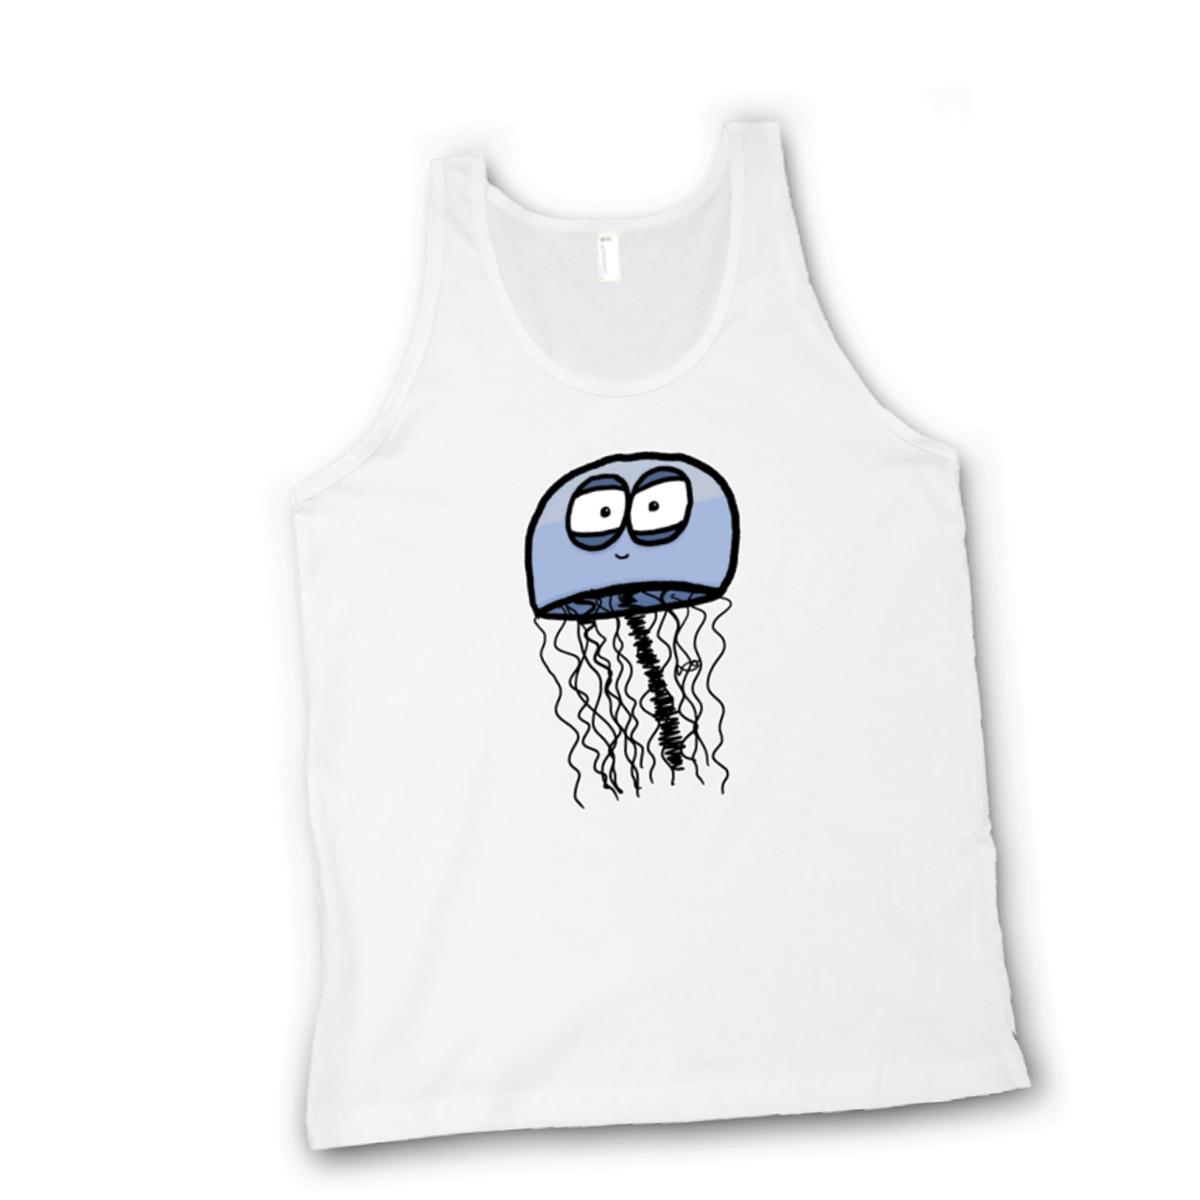 Jelly Fish Unisex Tank Top Small white